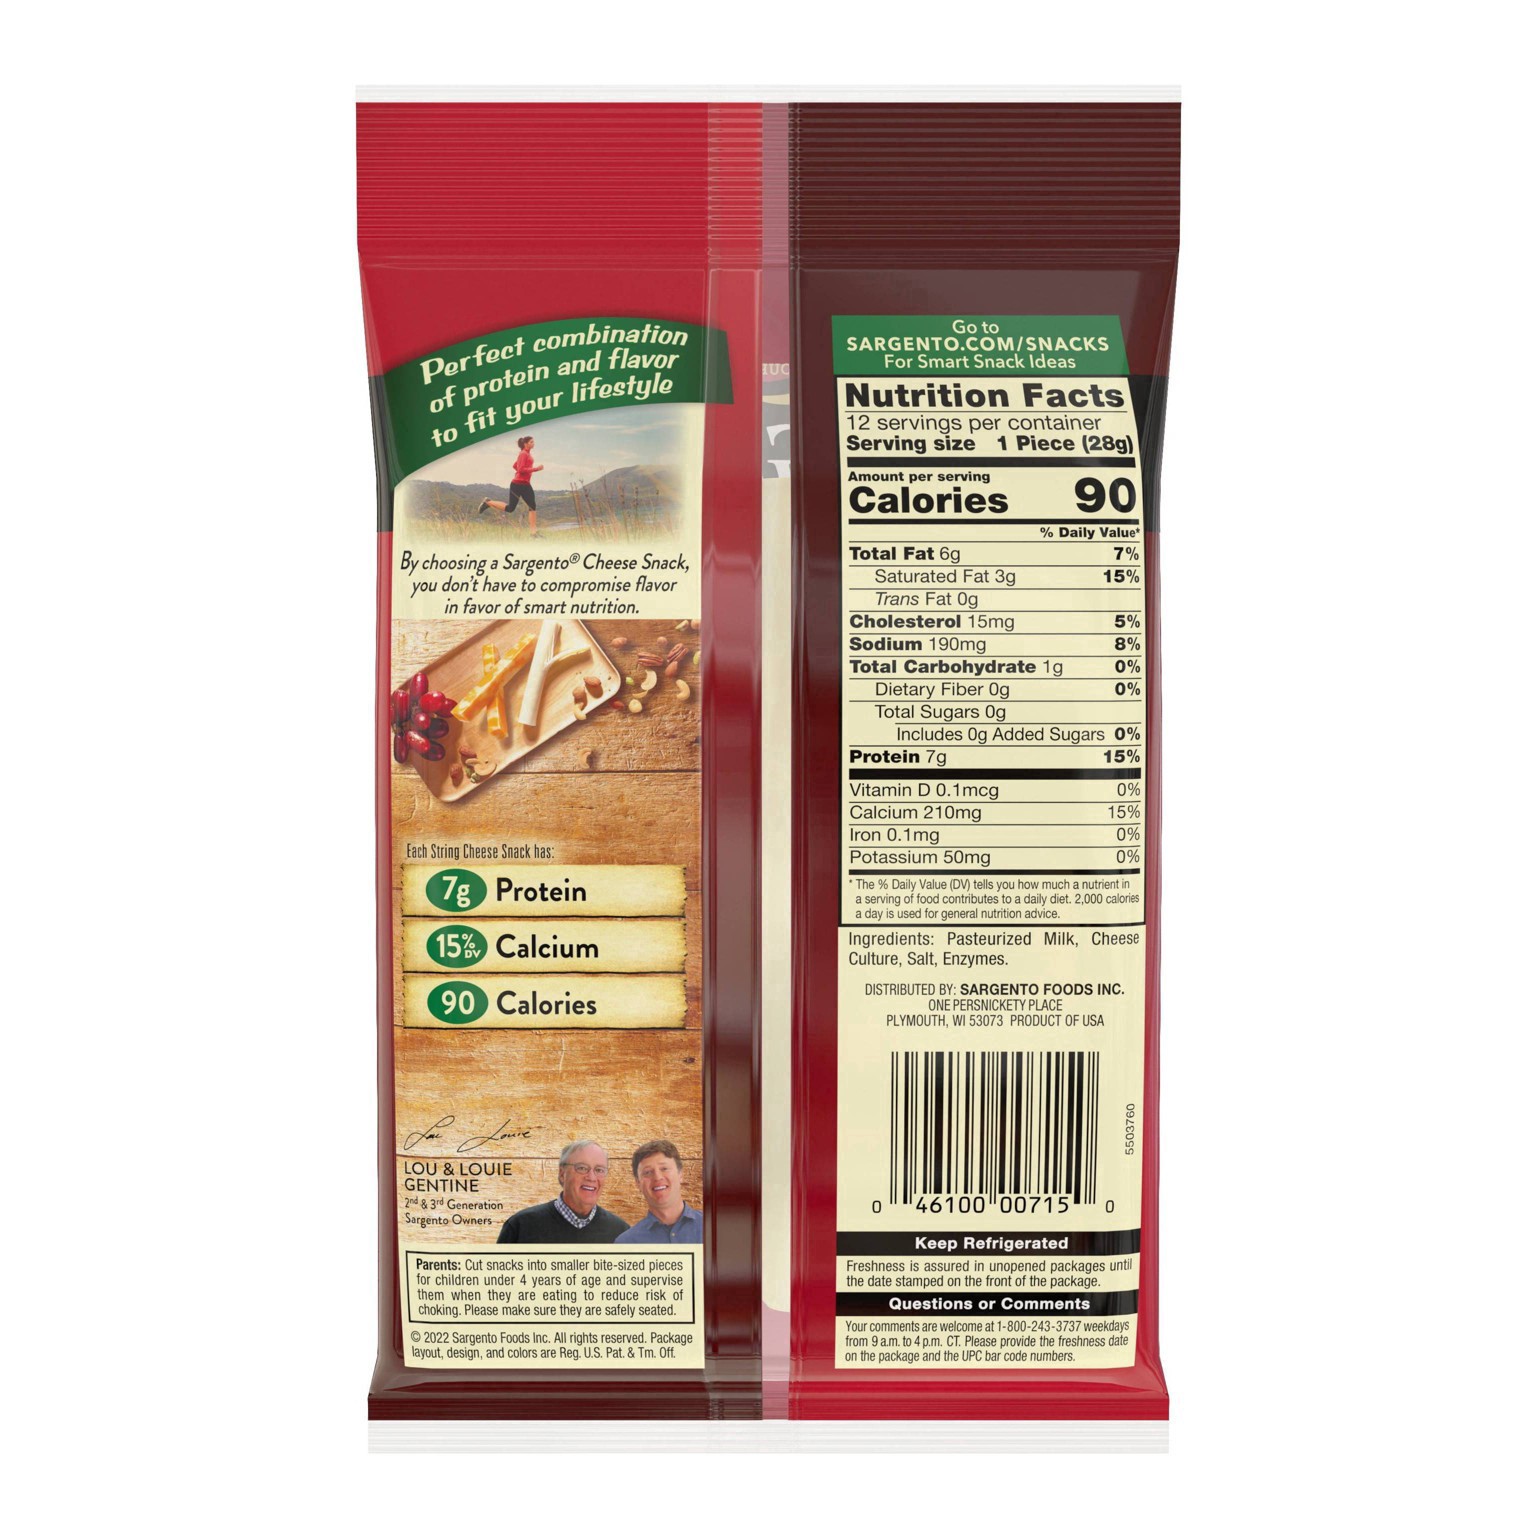 slide 42 of 76, Sargento Natural String Cheese Snacks, 12-Count, 12 ct